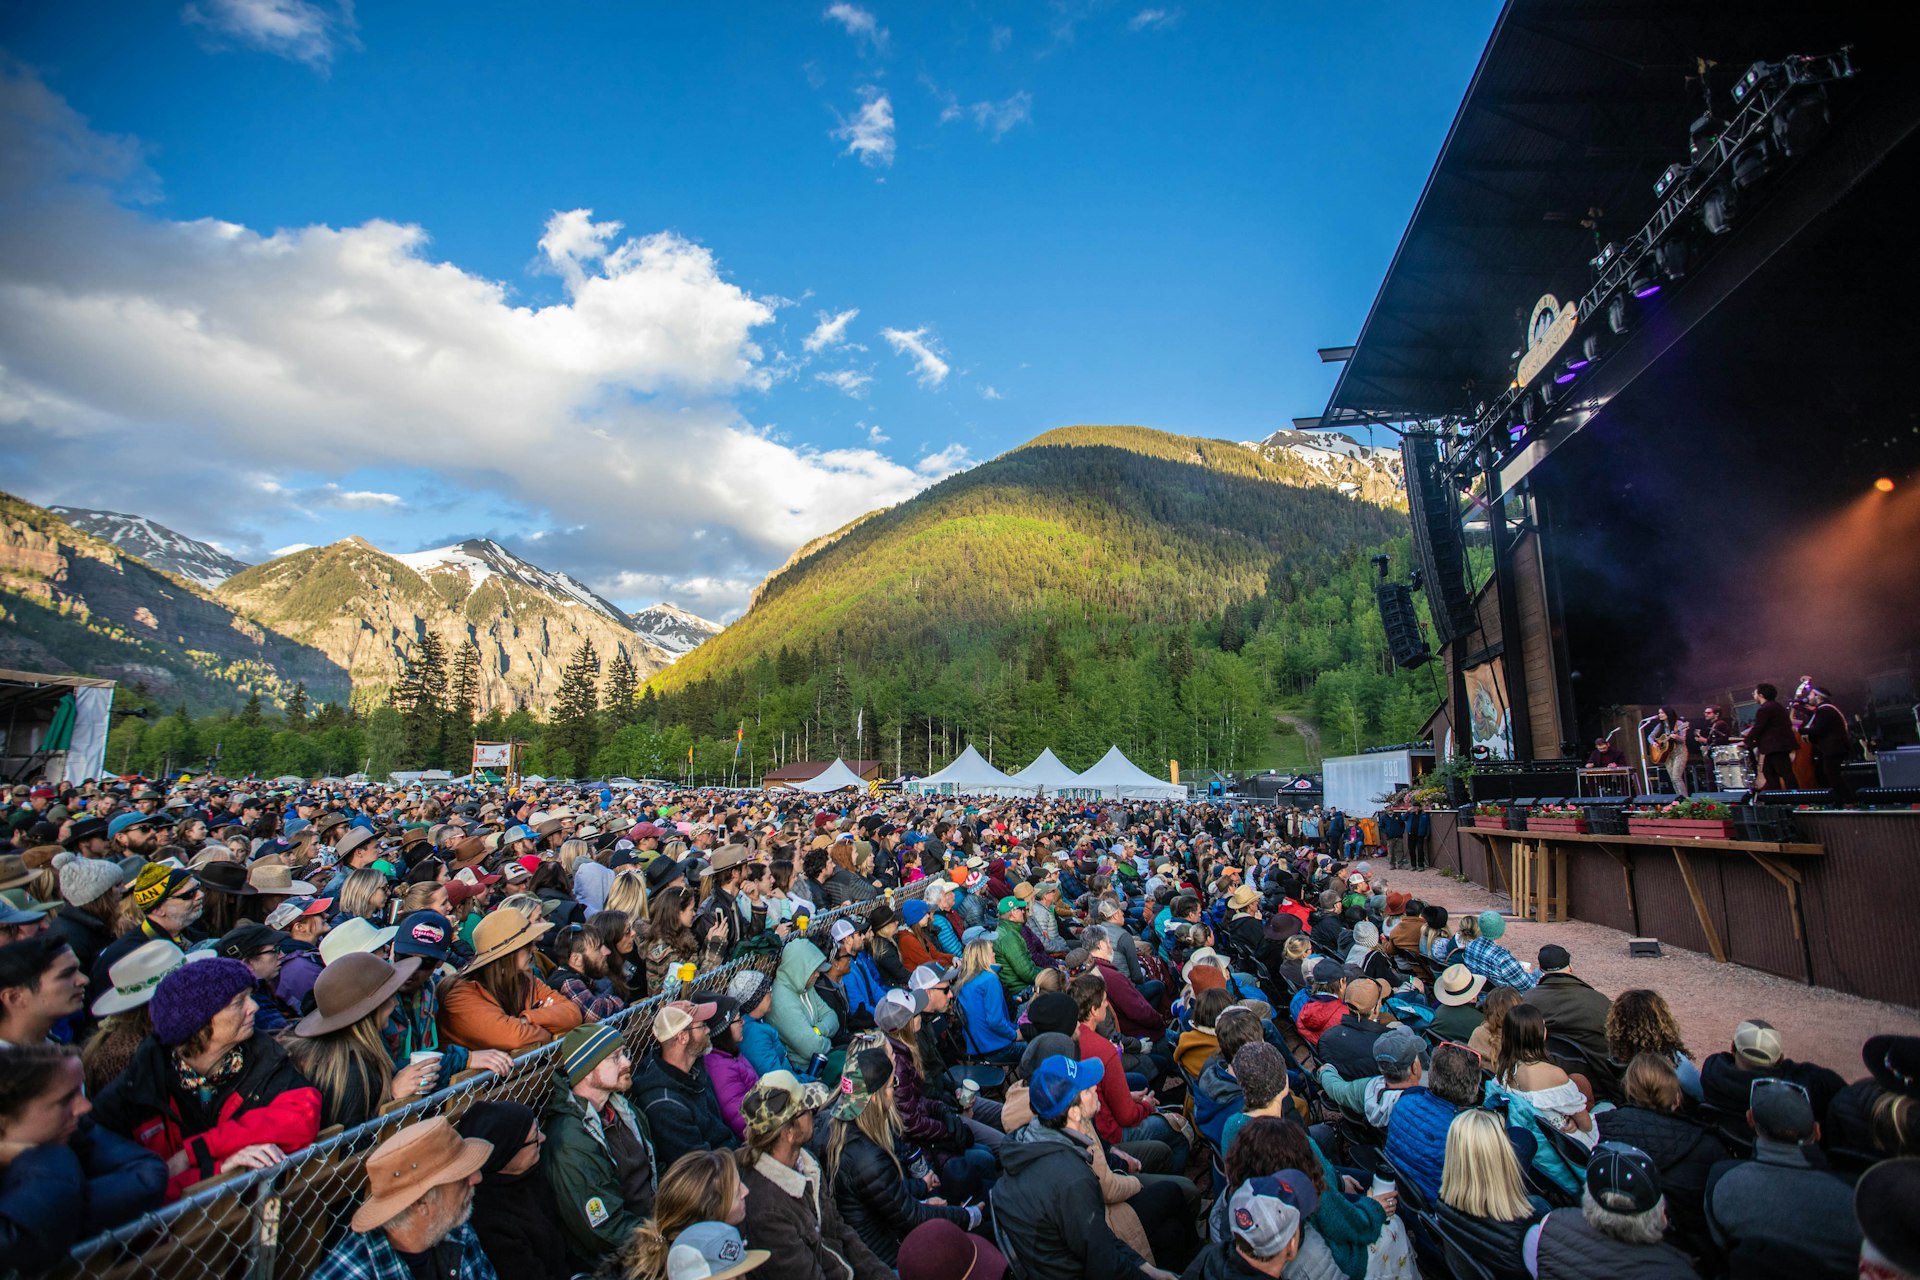 People gather at a music festival stage in front of beautiful mountains. 